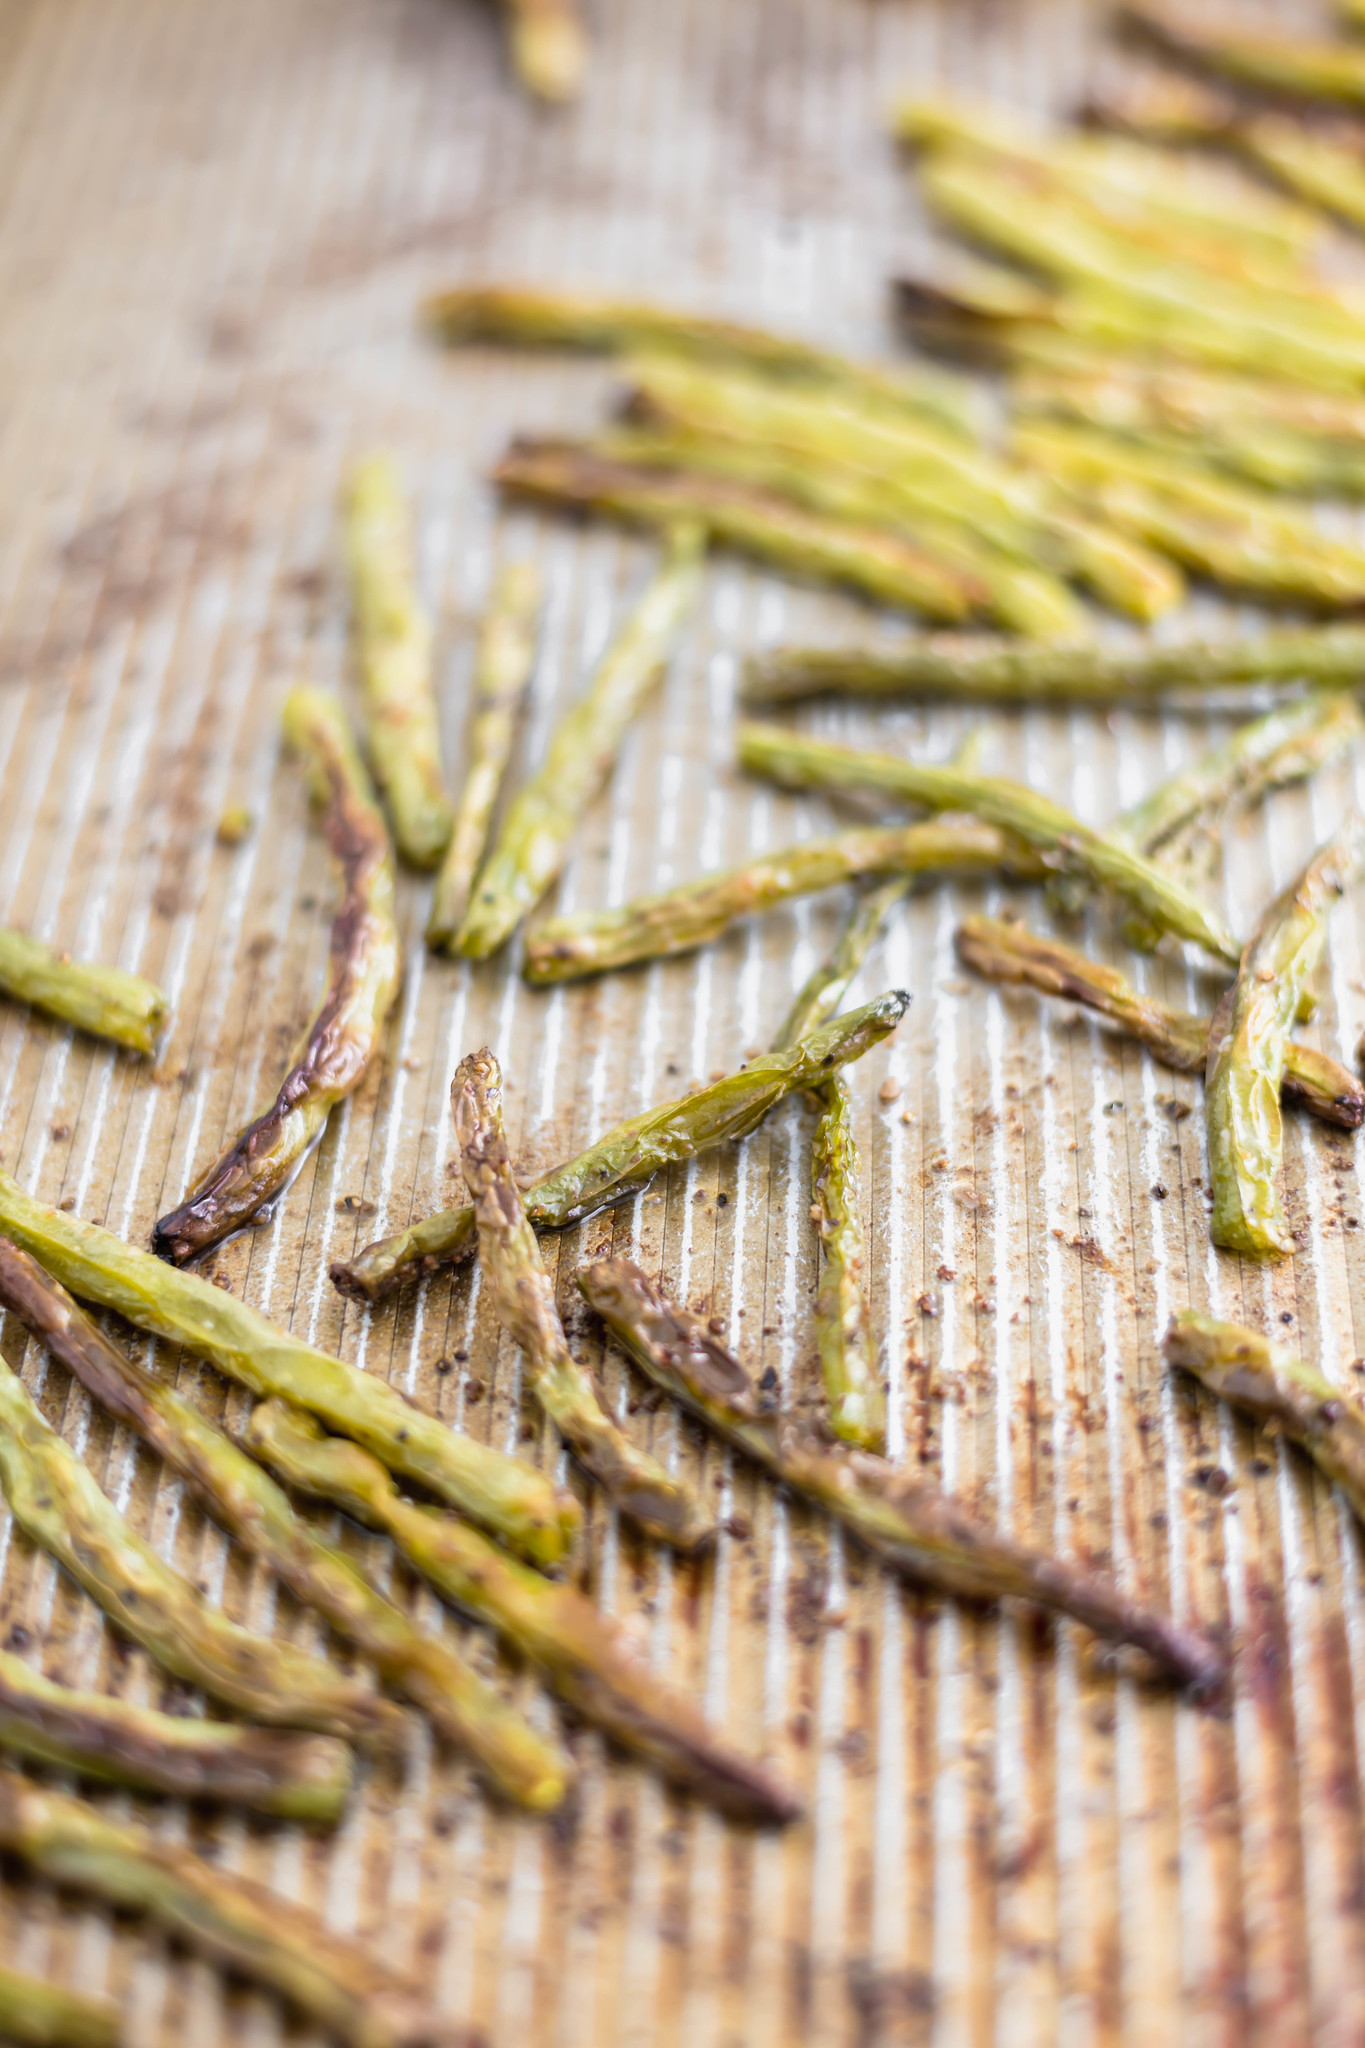 Need an easy side dish that takes less than 30 minutes? These Roasted Green Beans are super simple to make and go with everything.